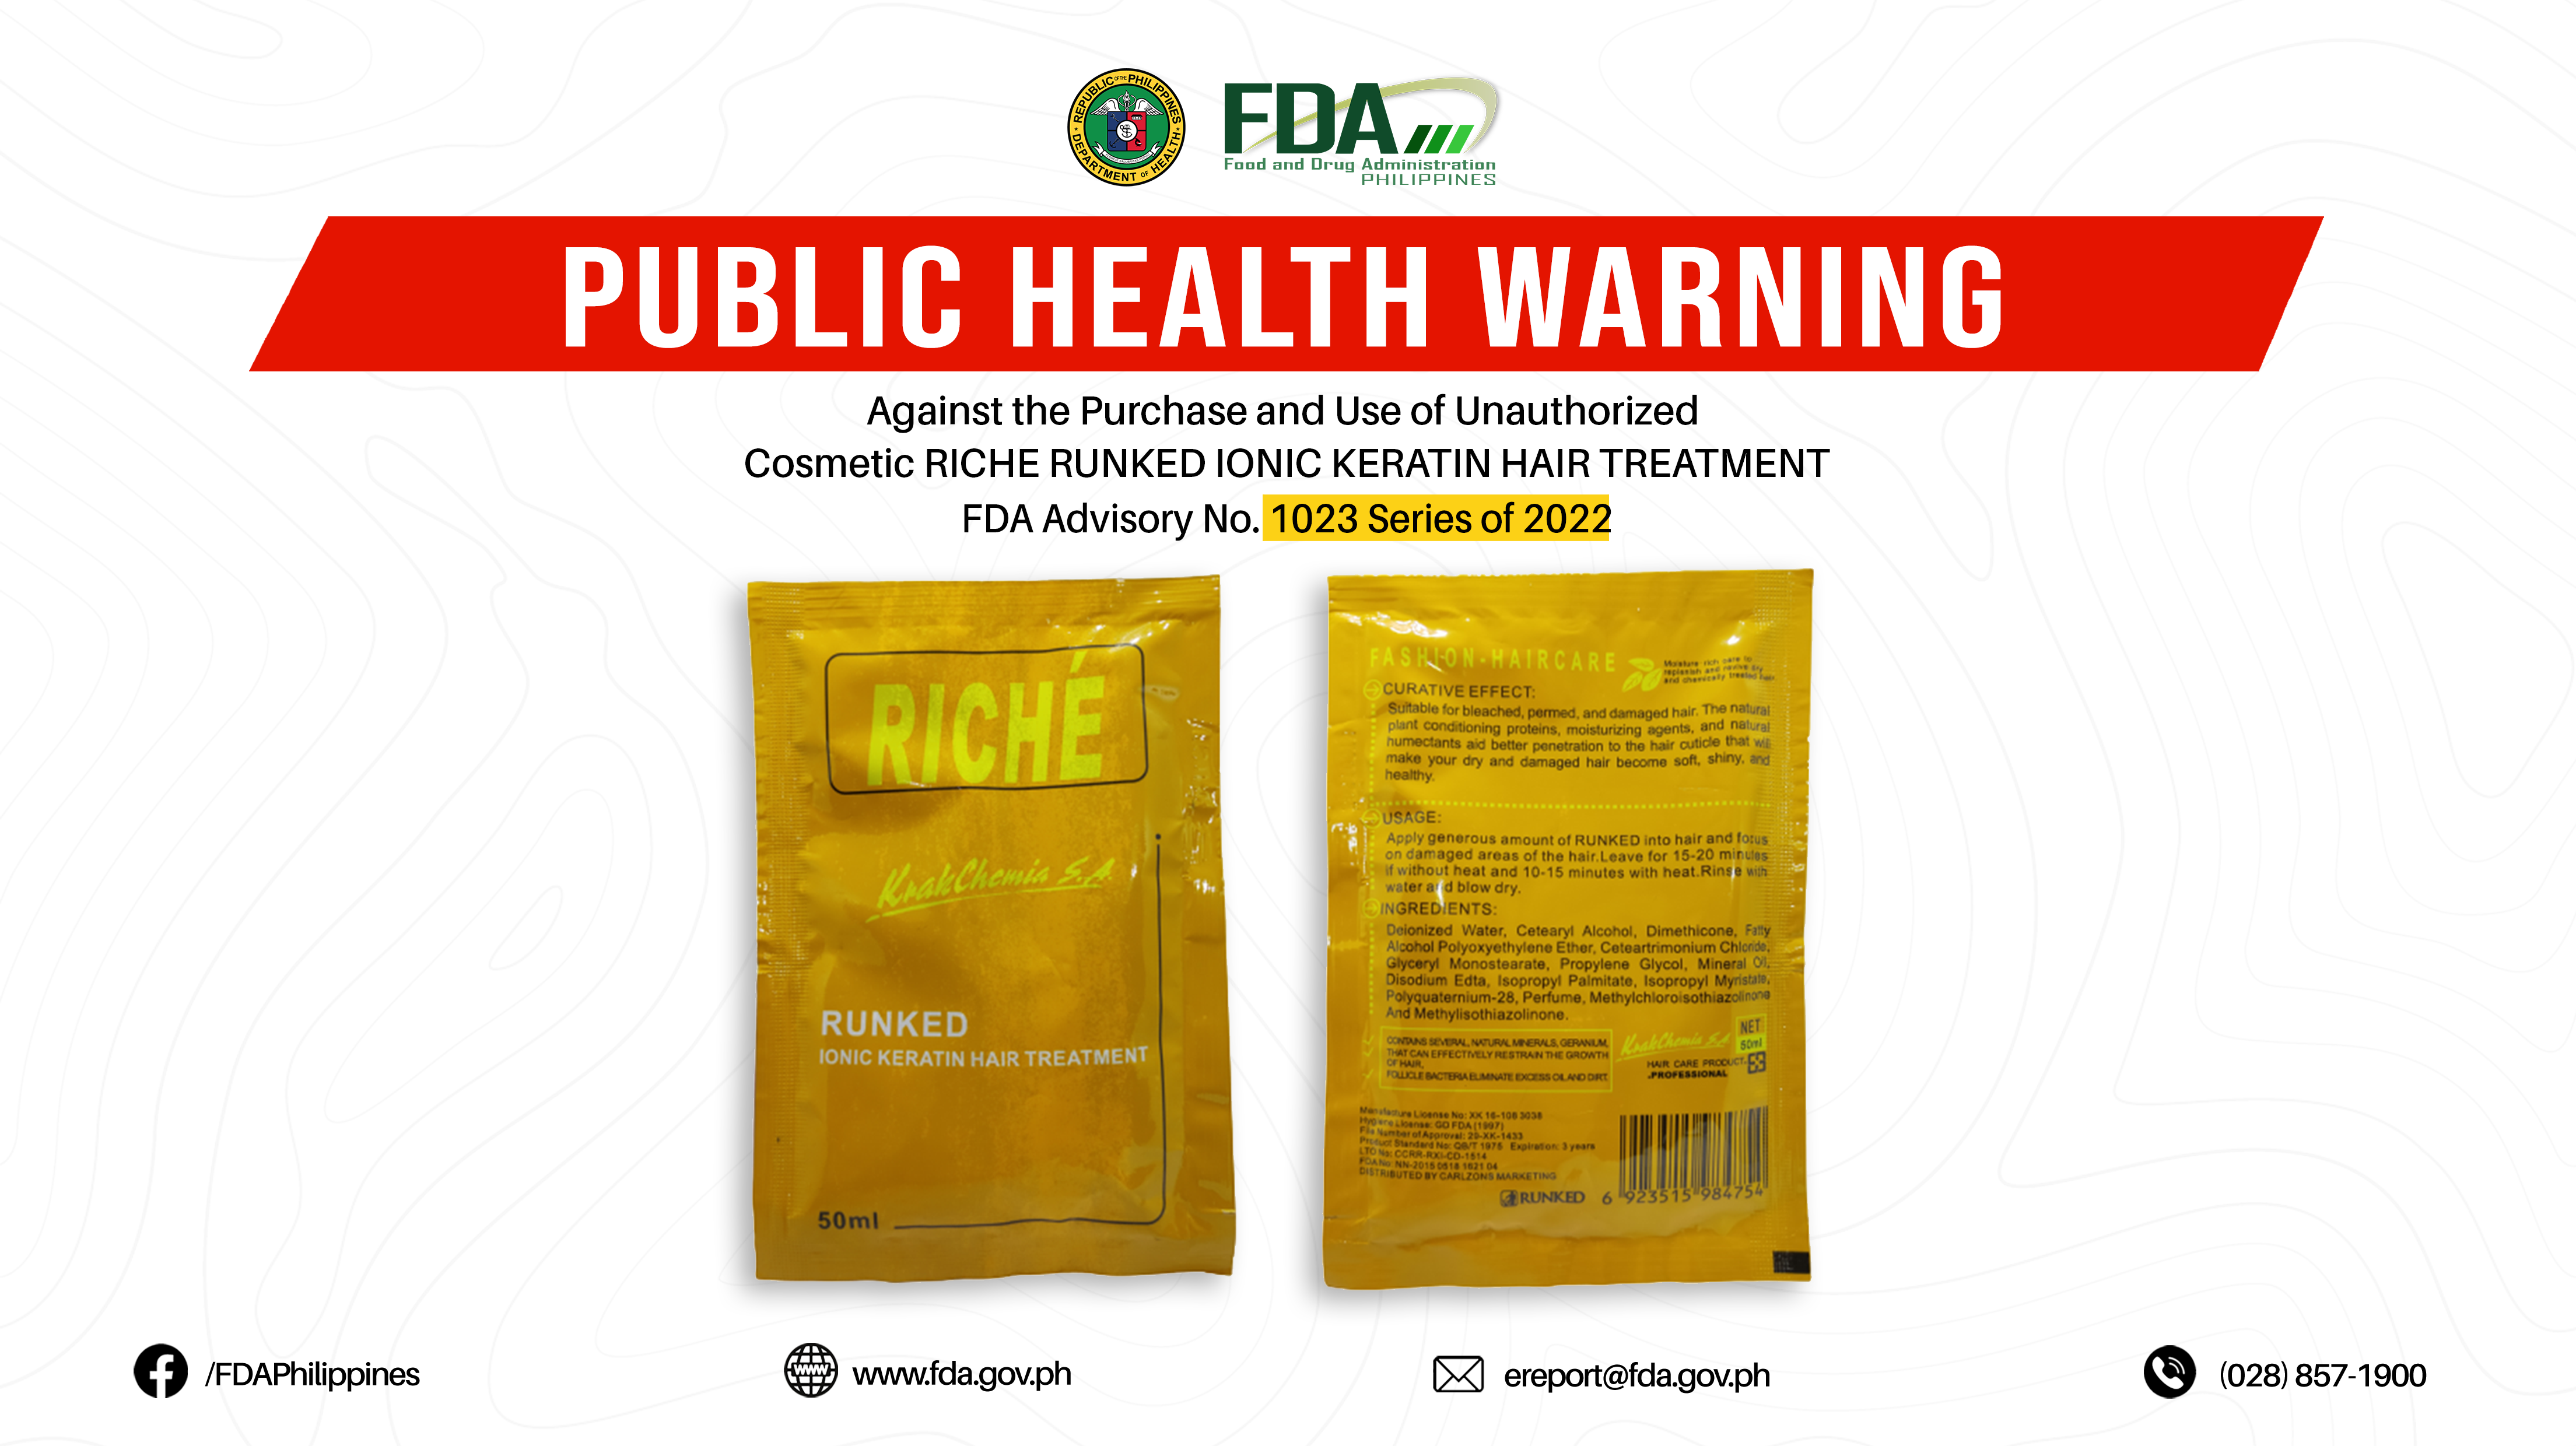 FDA Advisory No.2022-1023 || Public Health Warning Against the Purchase and Use of Unauthorized Cosmetic RICHE RUNKED IONIC KERATIN HAIR TREATMENT